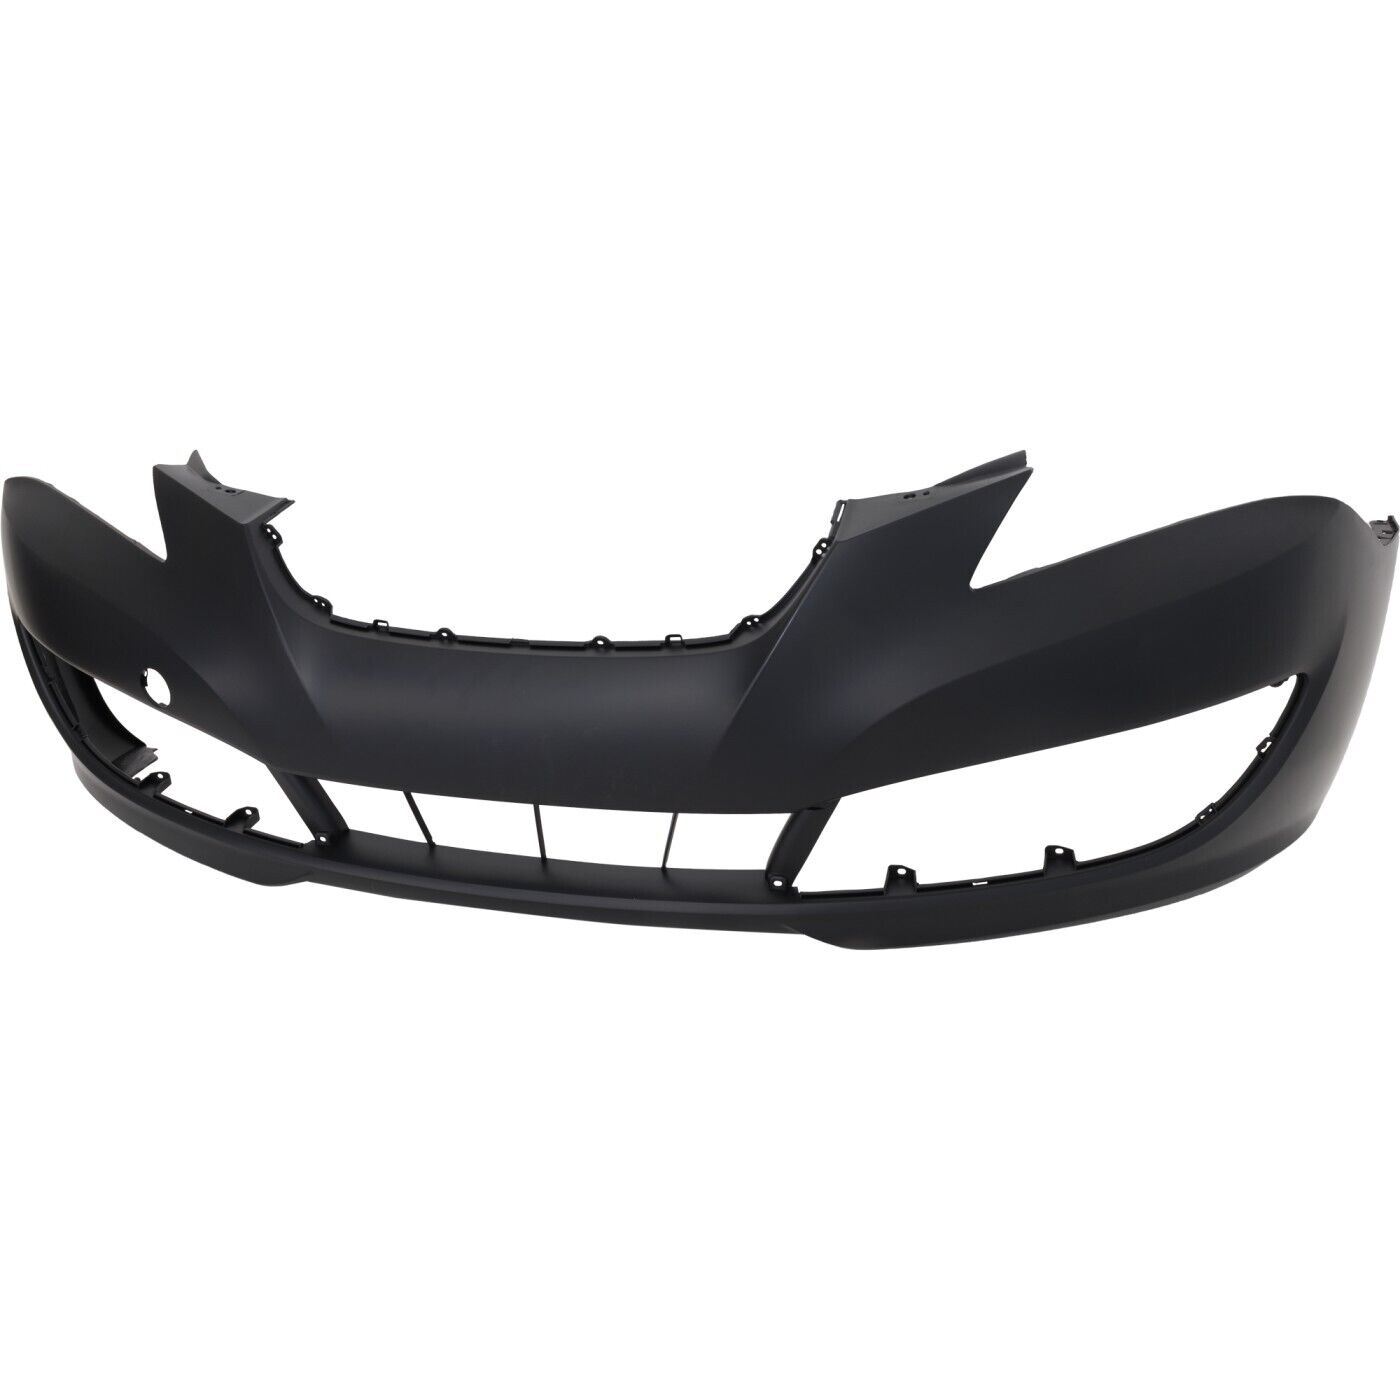 Front Bumper Cover For 2010 2011 2012 Hyundai Genesis Coupe With Fog Light Holes